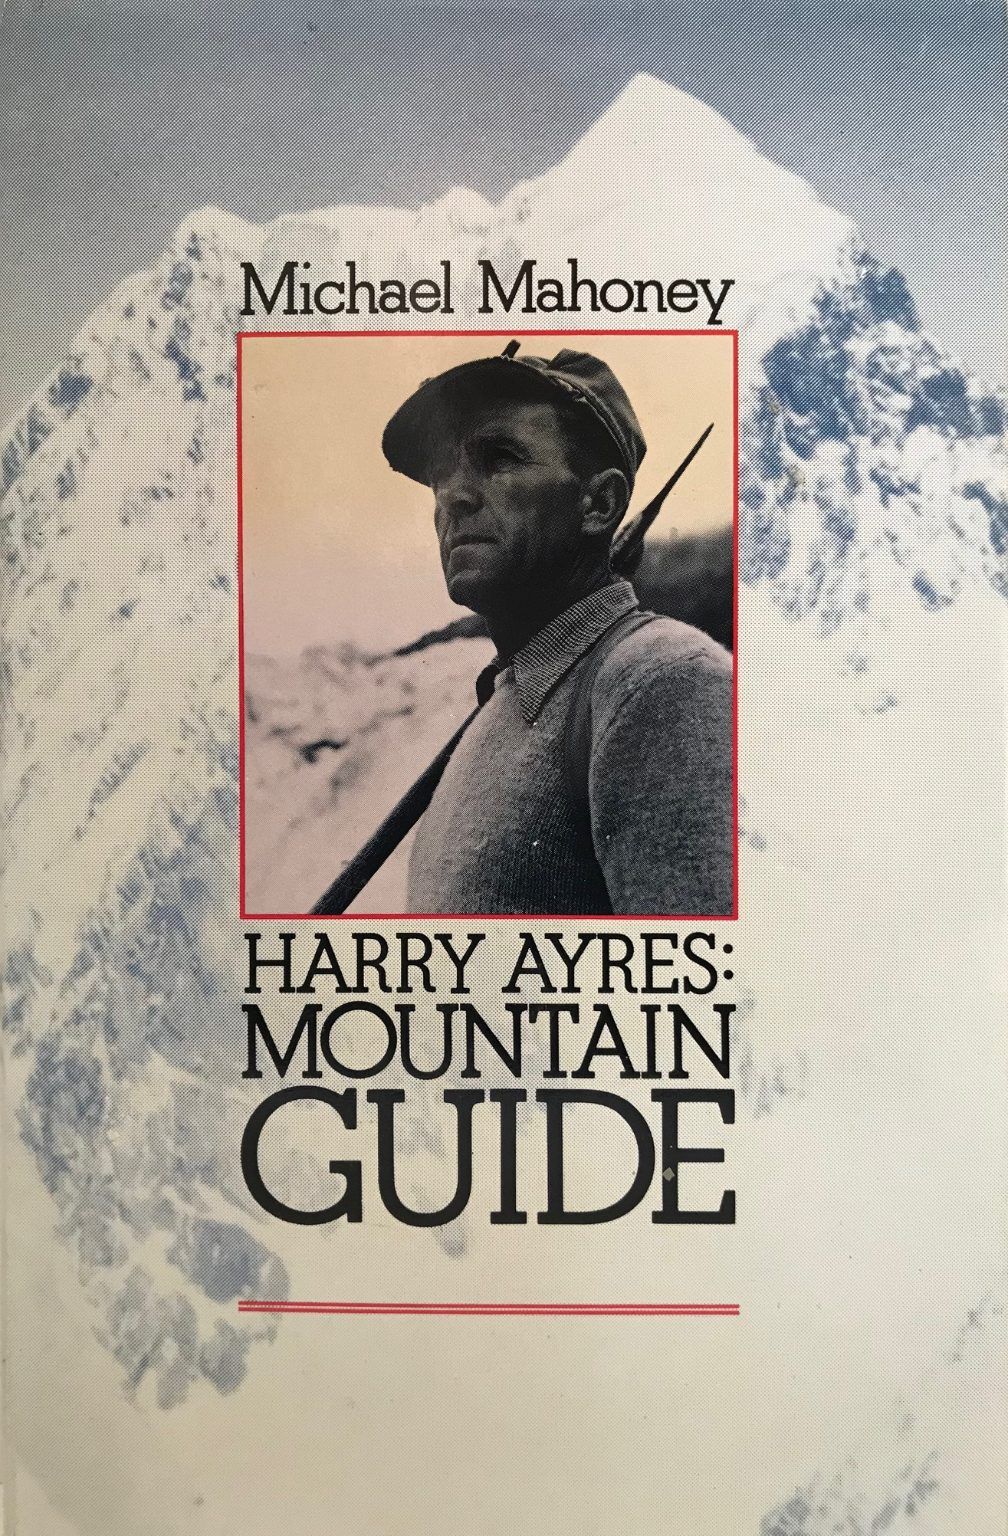 HARRY AYRES: Mountain Guide